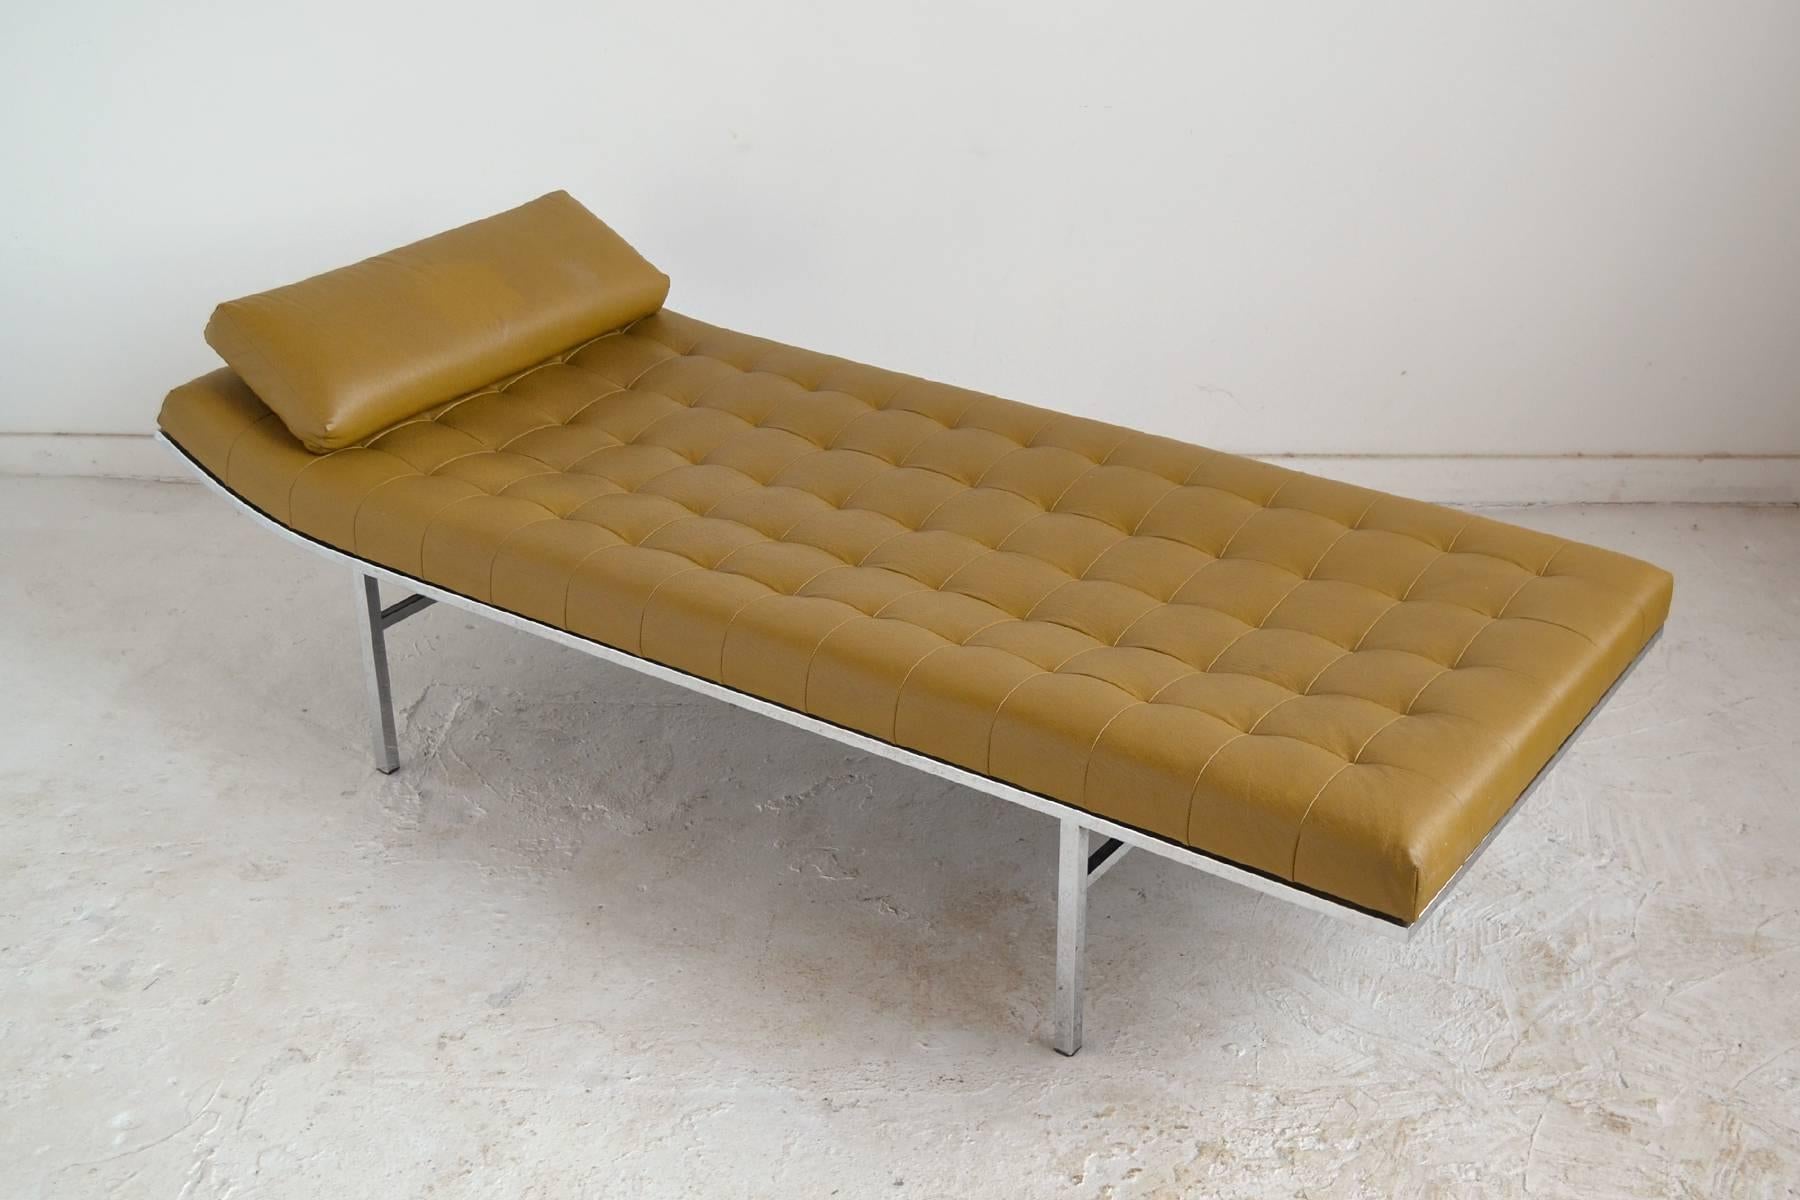 An elegant and extremely comfortable design, this chaise or daybed by Jules Heumann for Metropolitan has a long, low upholstered body with box tufting and a slightly raised end supported by a chromed steel frame. A loose cushion provides additional